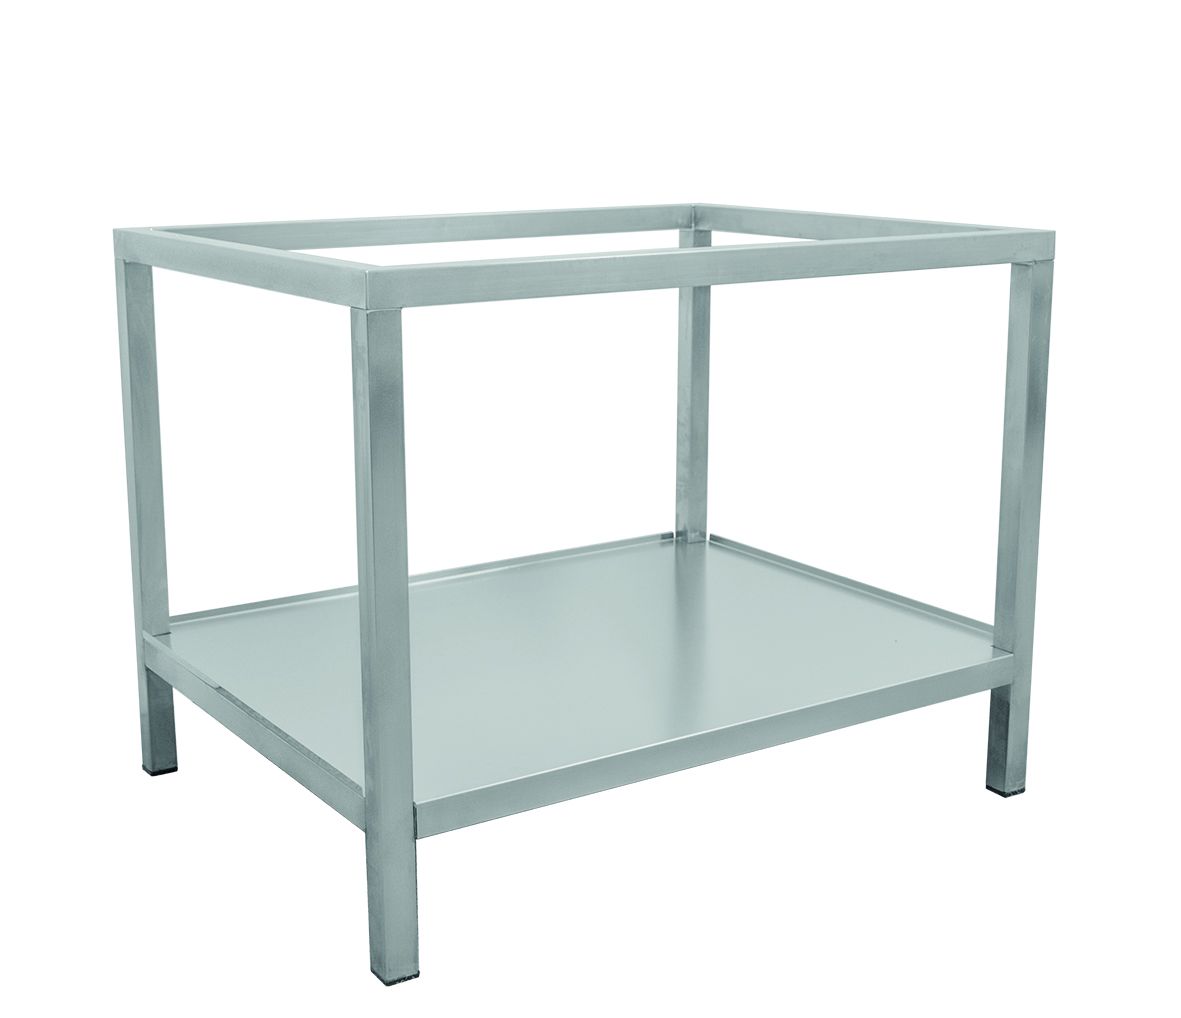 Parry ST-AG4H - Stainless Steel Equipment Stand